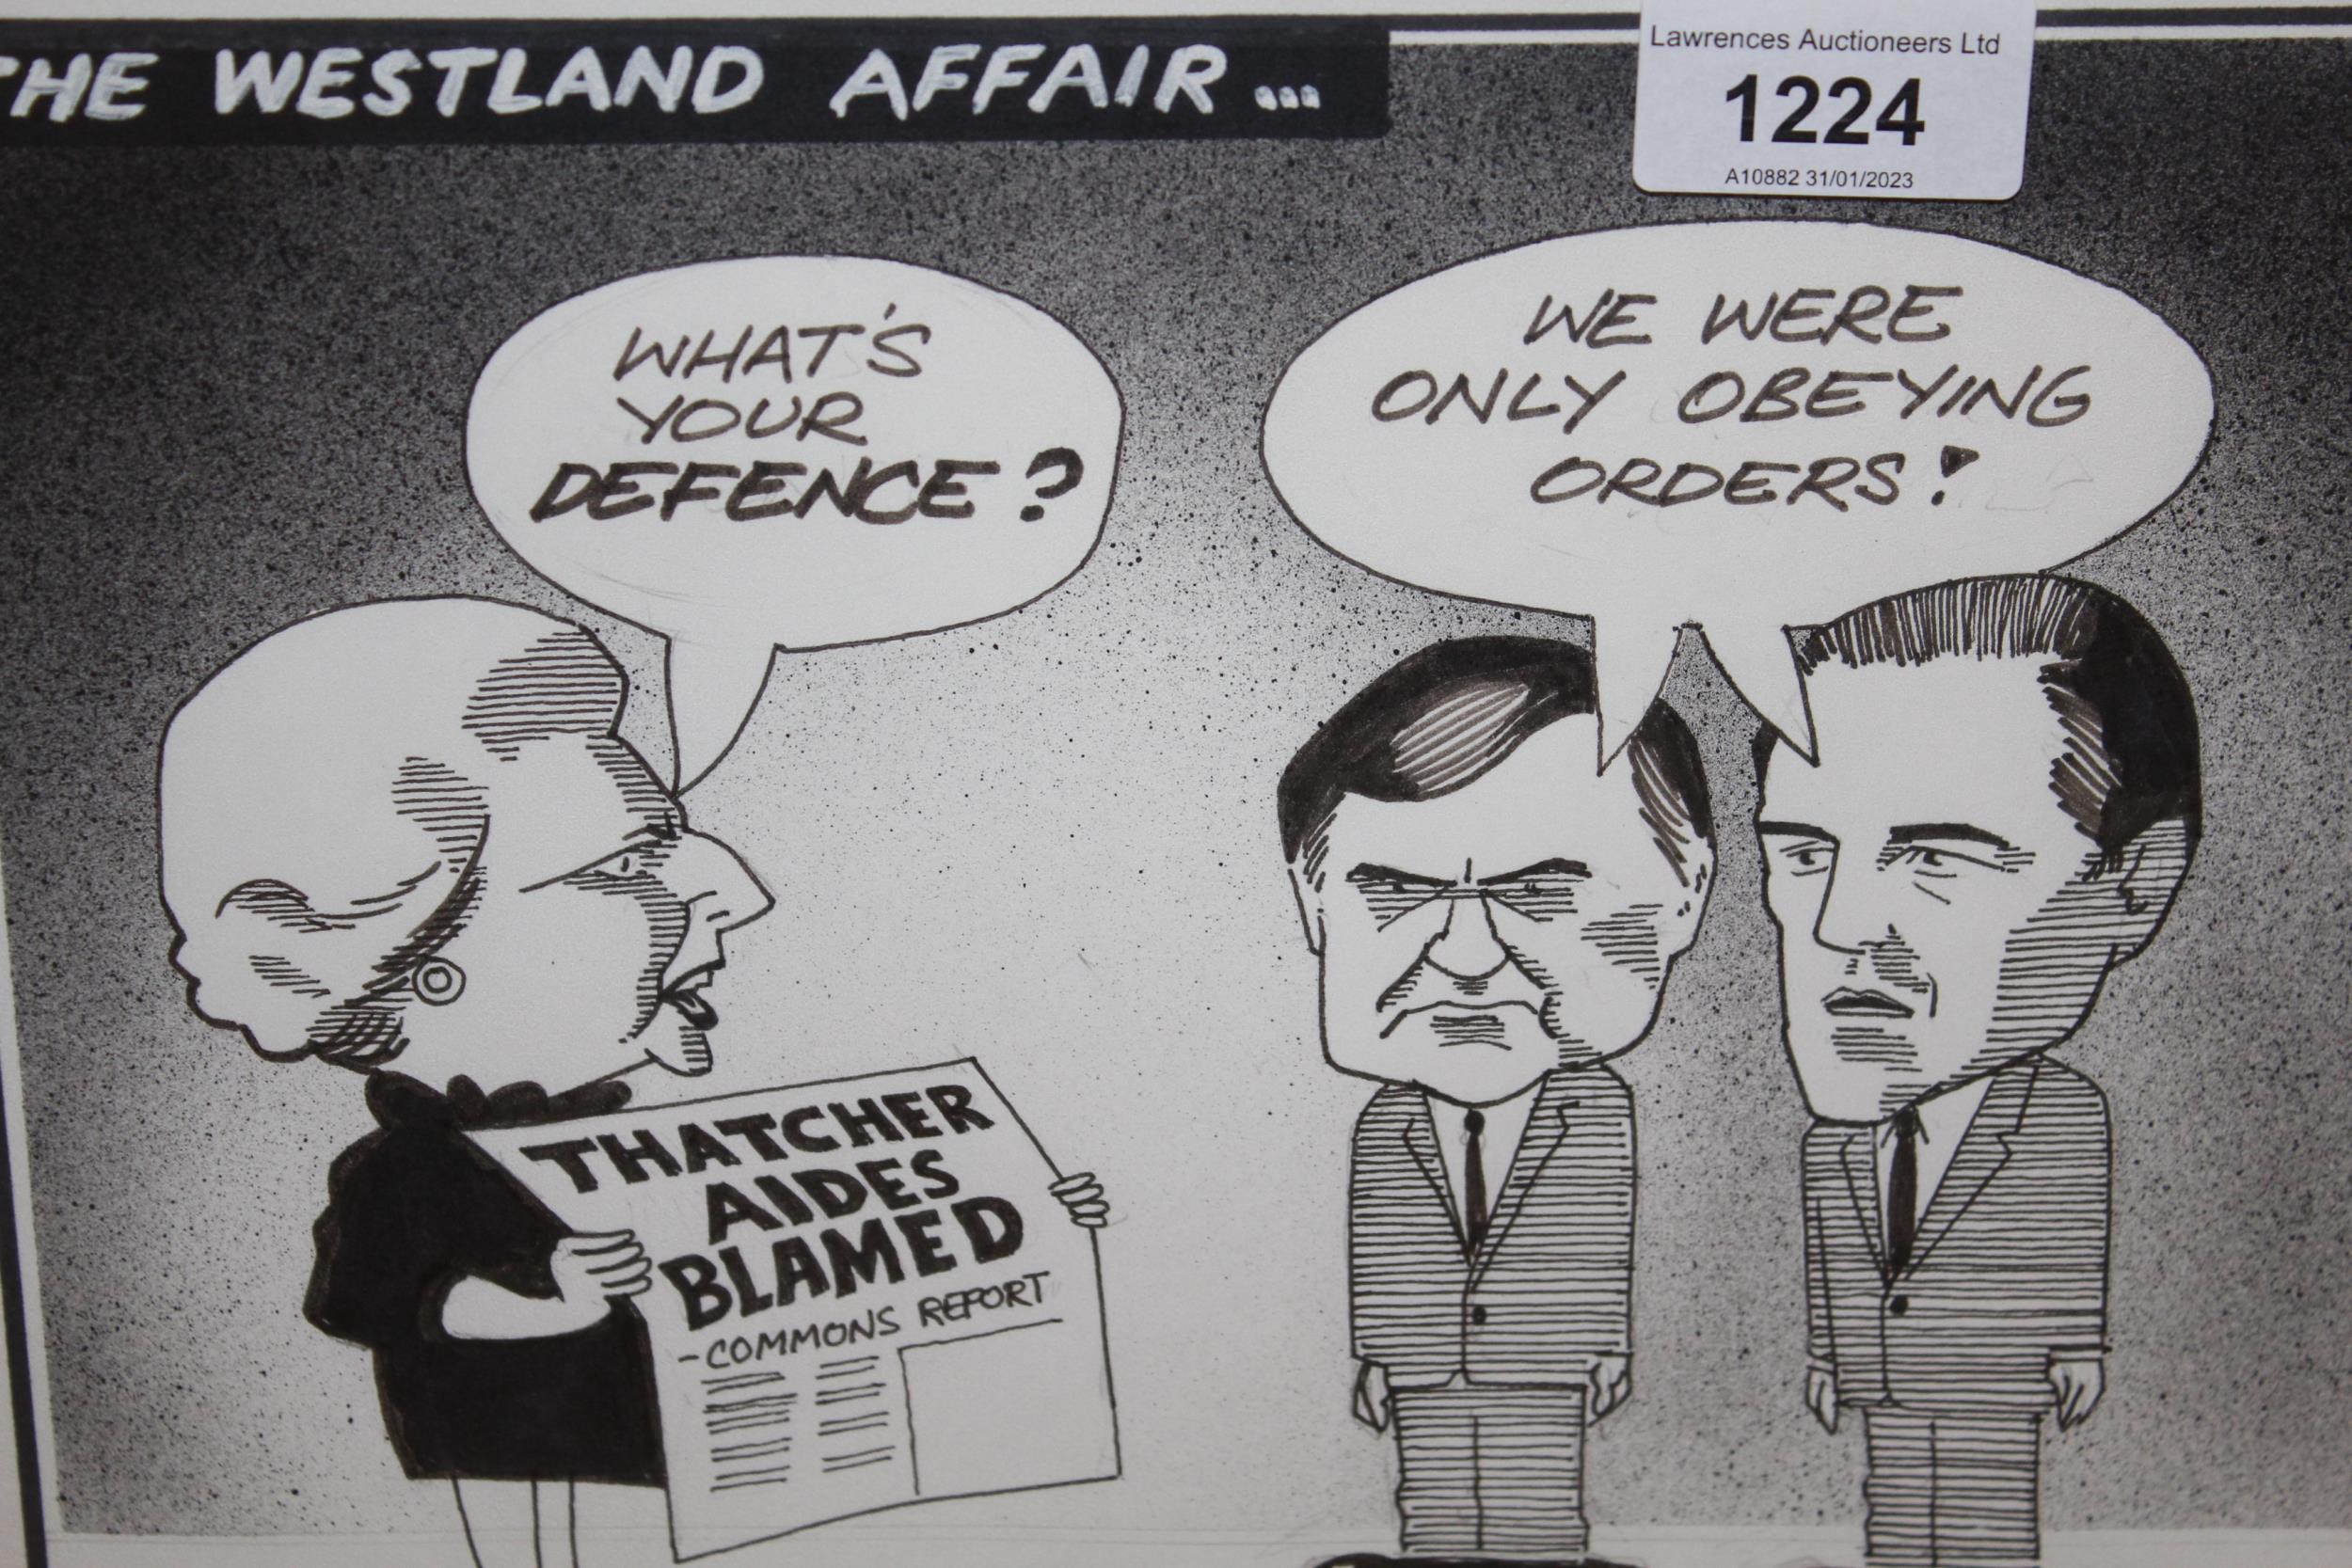 Original cartoon drawing by John Kerr, ' Leaks Acquittal', together with another 'The estland